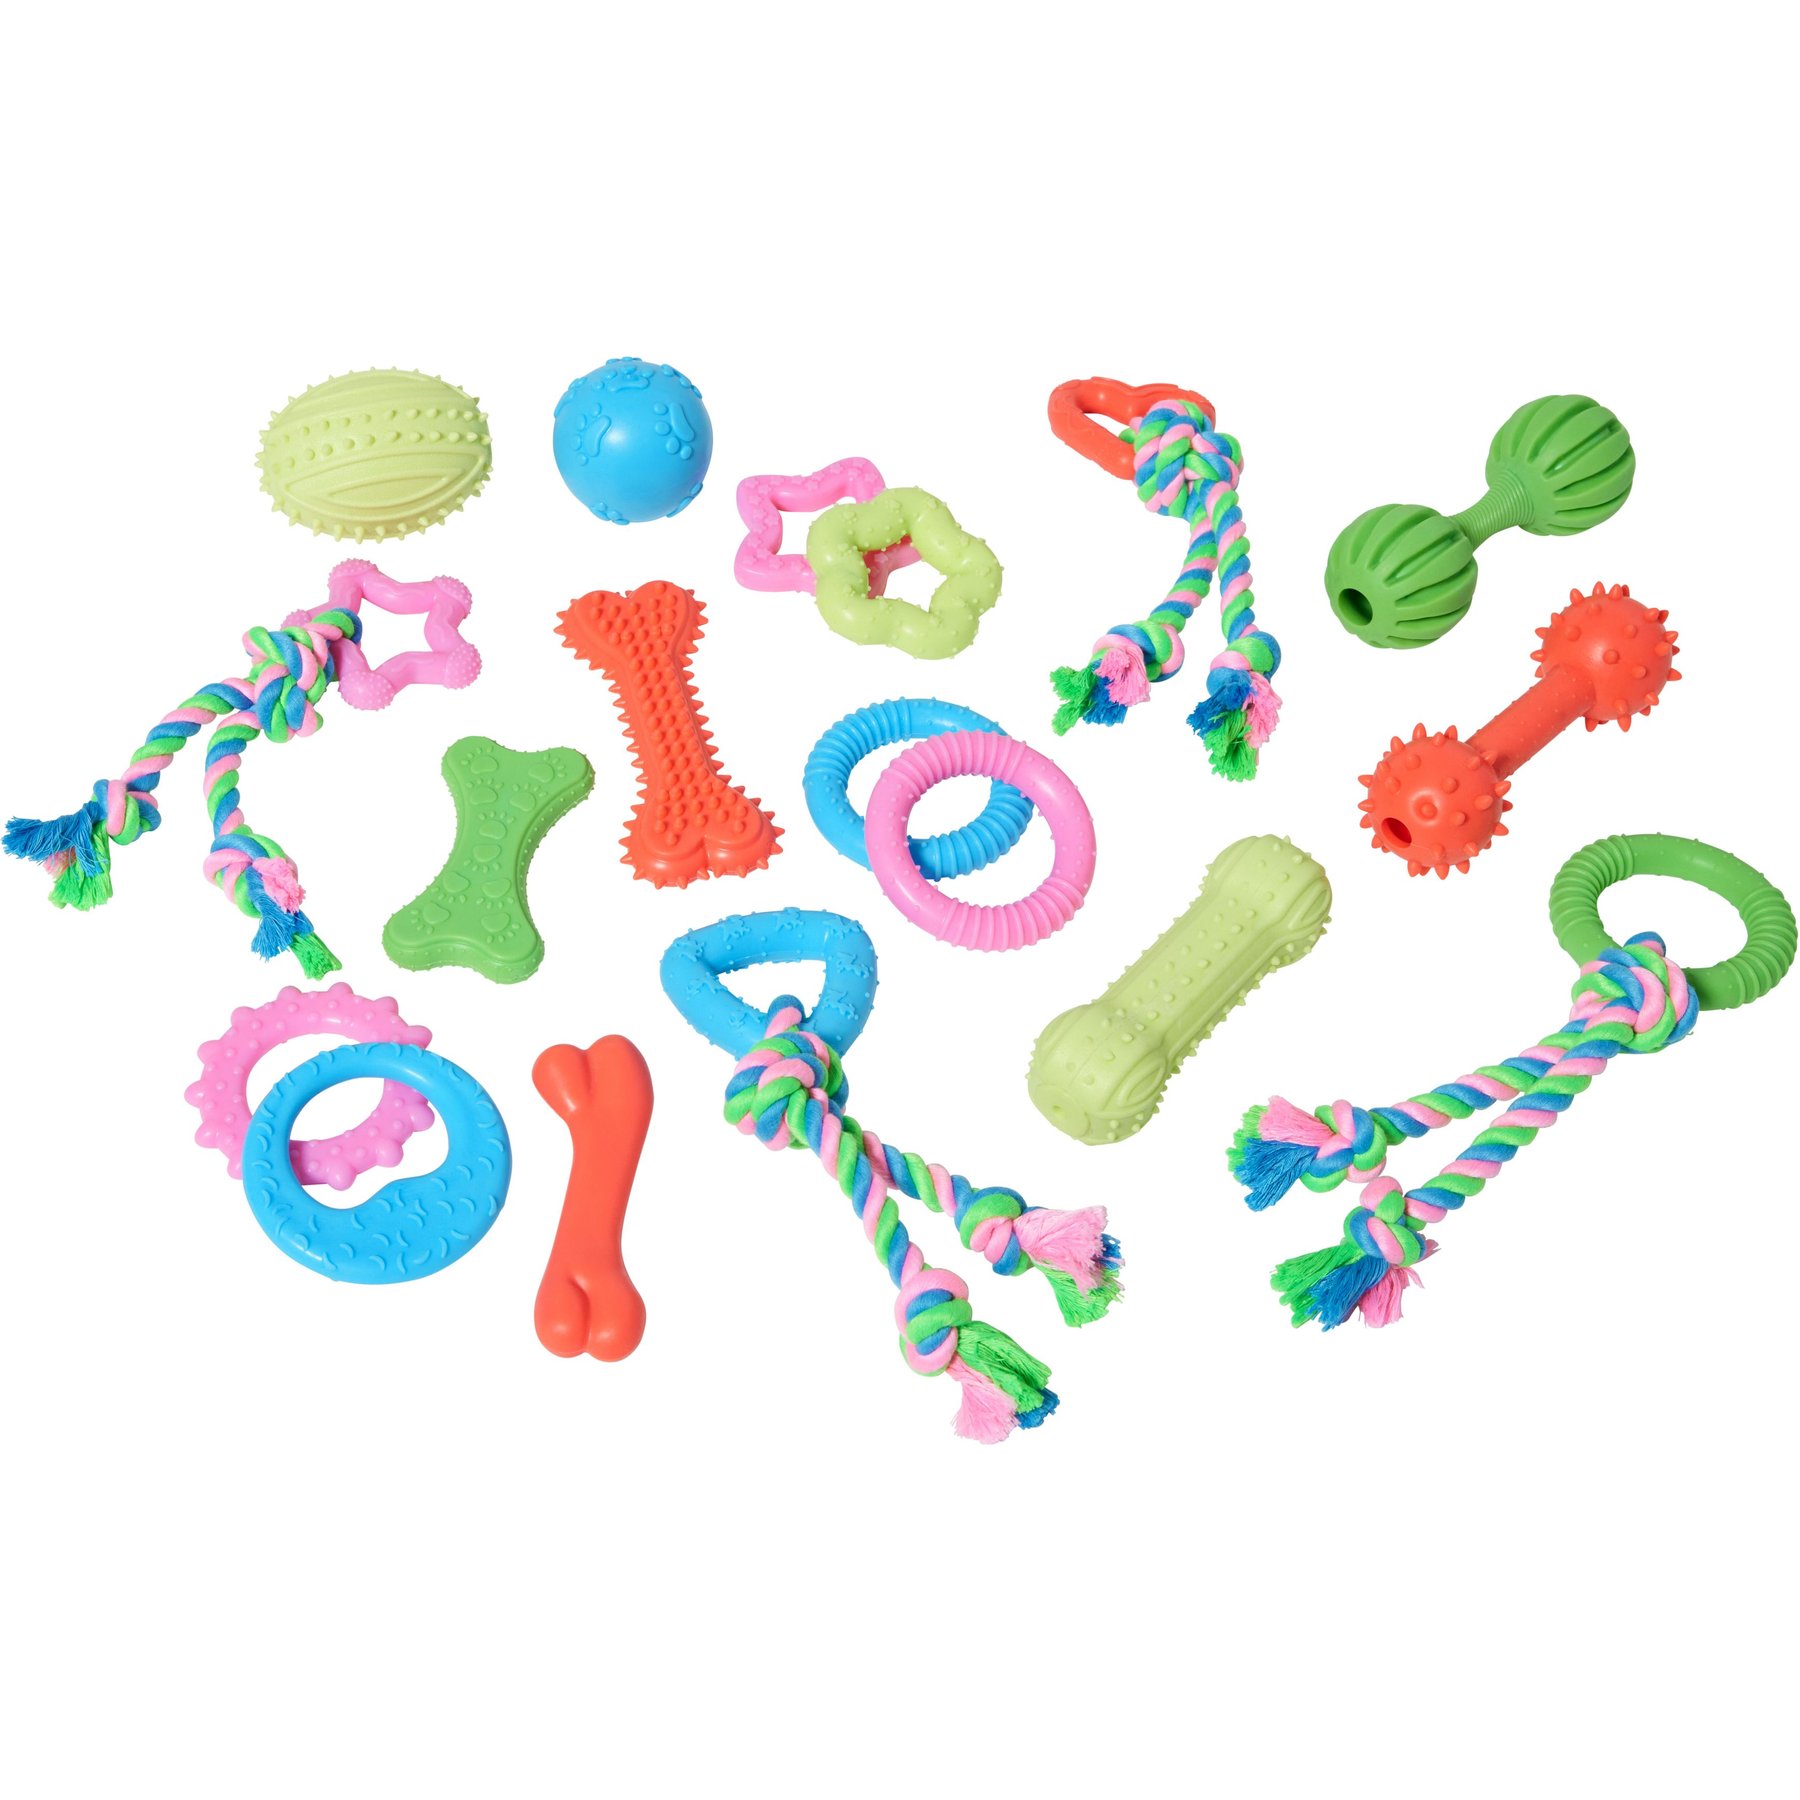 Frisco Jungle Pals Plush & Rope Variety Pack Dog Toy, 6 Count